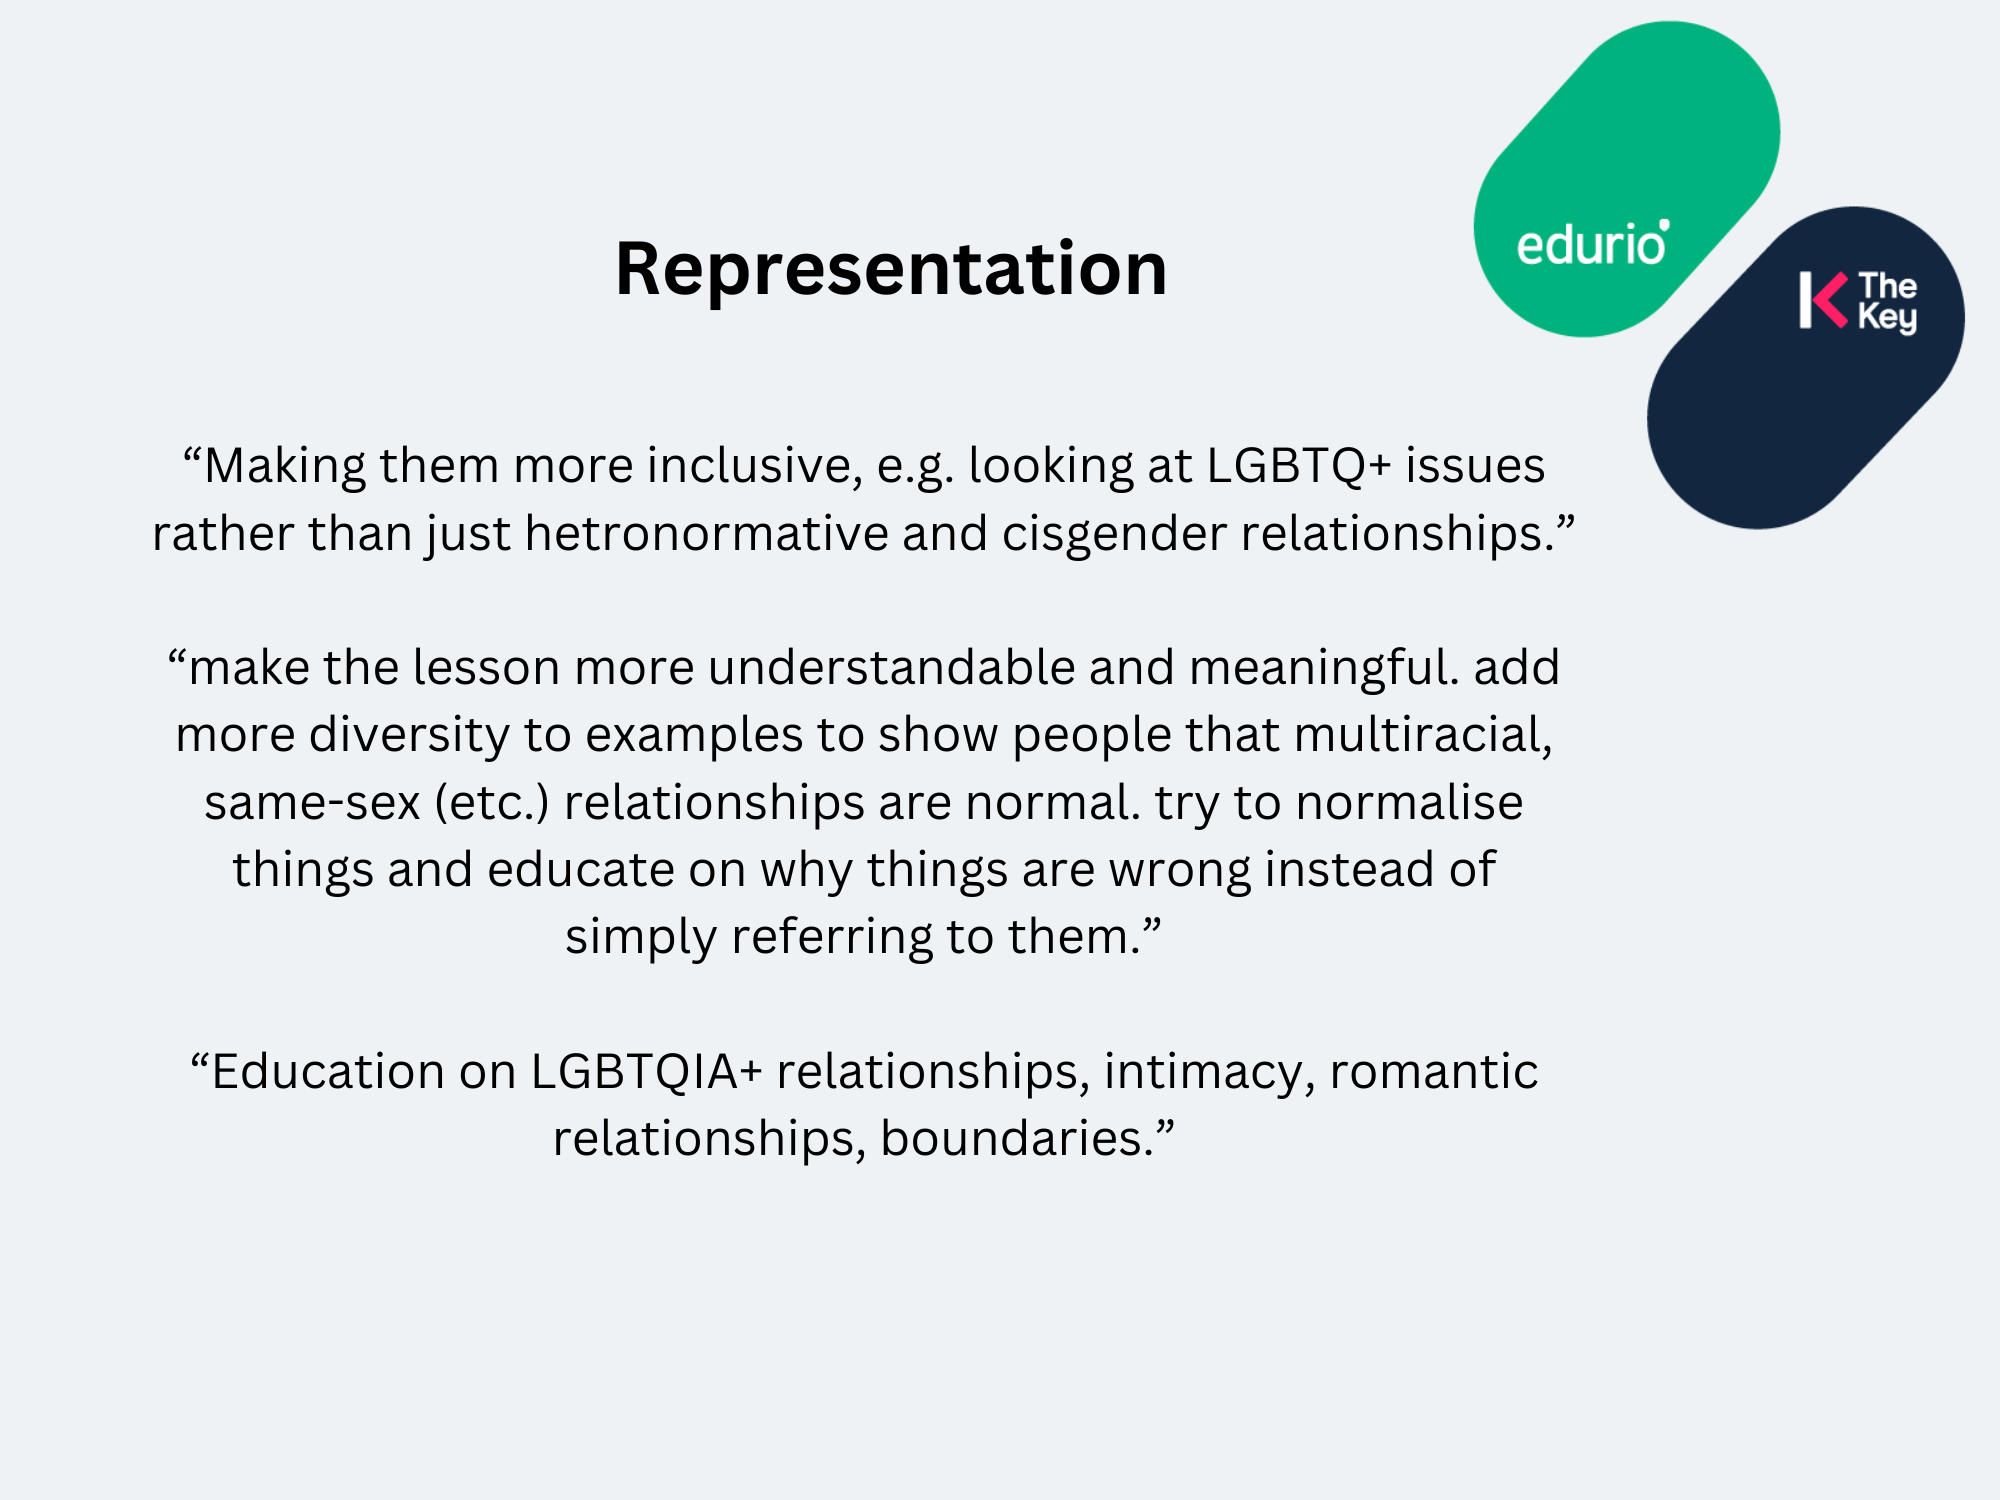 Quotes from pupils about representation in the RSE curriculum 
“Making them more inclusive, e.g. looking at LGBTQ+ issues rather than just hetronormative and cisgender relationships.” 
“make the lesson more understandable and meaningful. add more diversity to examples to show people that multiracial, same-sex (etc.) relationships are normal. try to normalise things and educate on why things are wrong instead of simply referring to them.”
“Education on LGBTQIA+ relationships, intimacy, romantic relationships, boundaries.”
